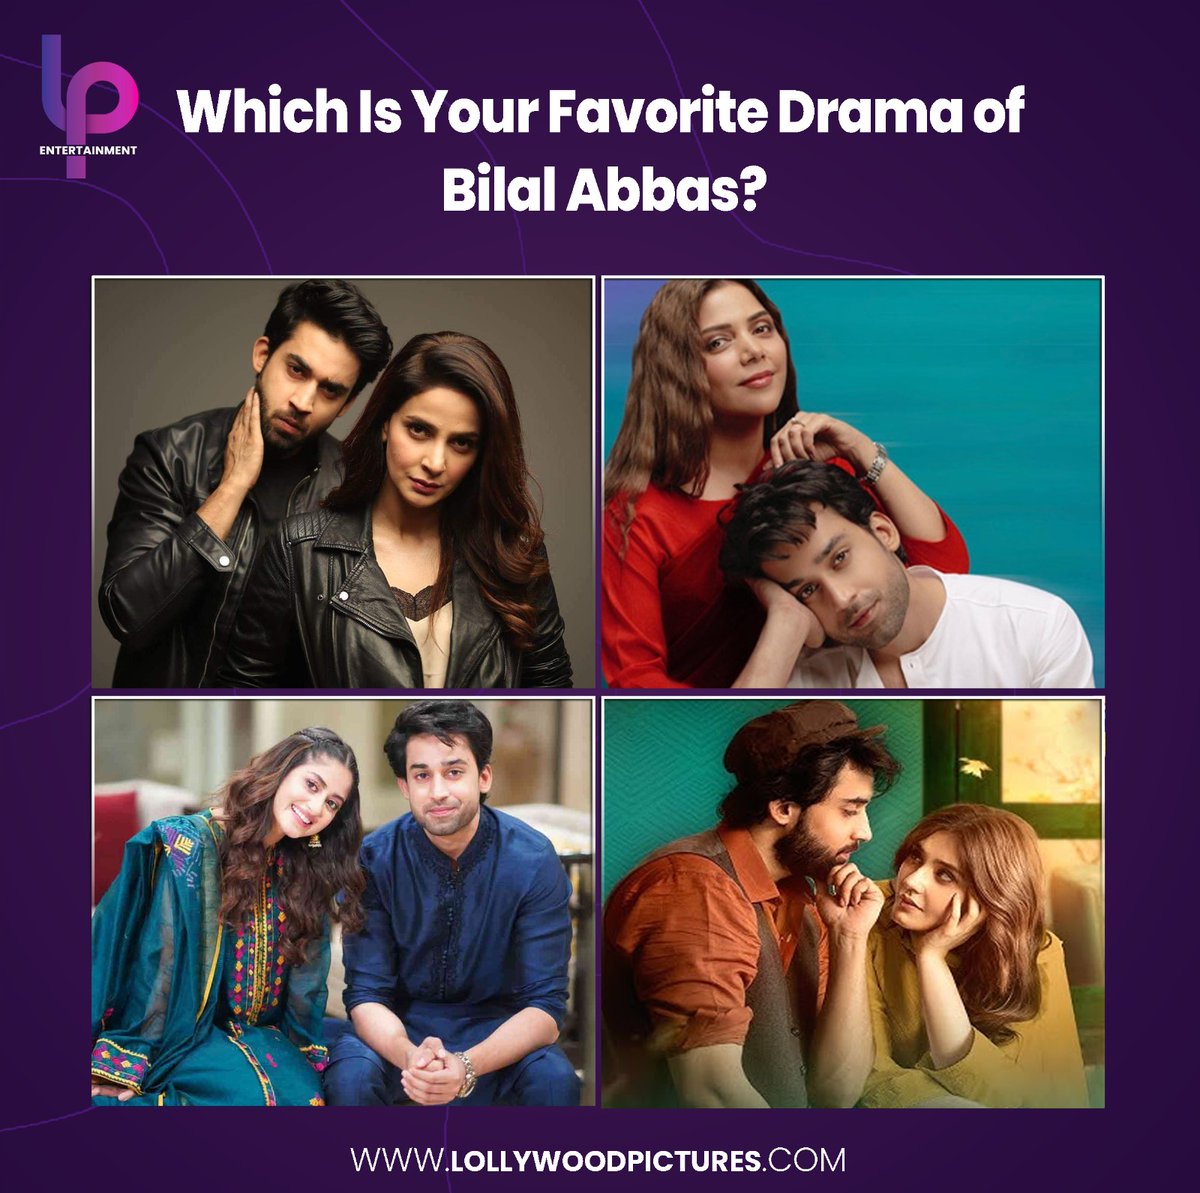 The ever versatile Bilal Abbas Khan has given us so many characters to cheer. 
Which Bilal Abbas drama is your most favorite among these? 

#Cheekh
#Dobaara 
#KuchAnkahi 
#IshqMurshid 

#lpentertainment #pakistaniactors #celebrities